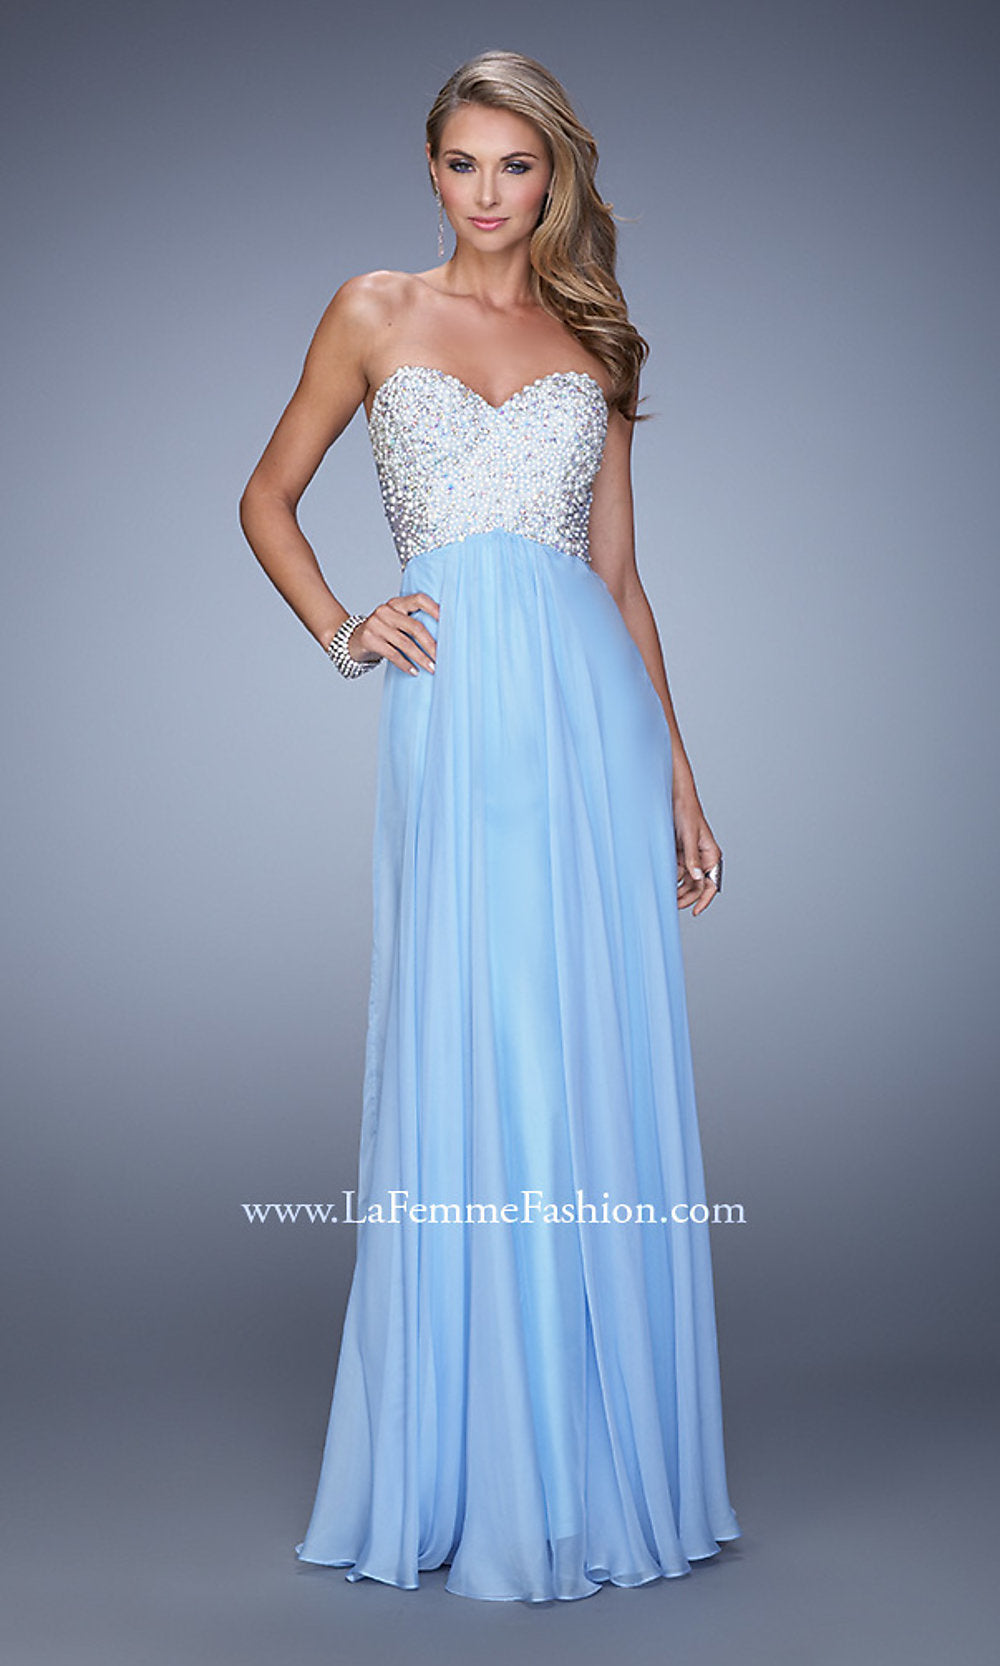 Cloud Blue Strappy-Back Long Strapless Prom Dress with Beads